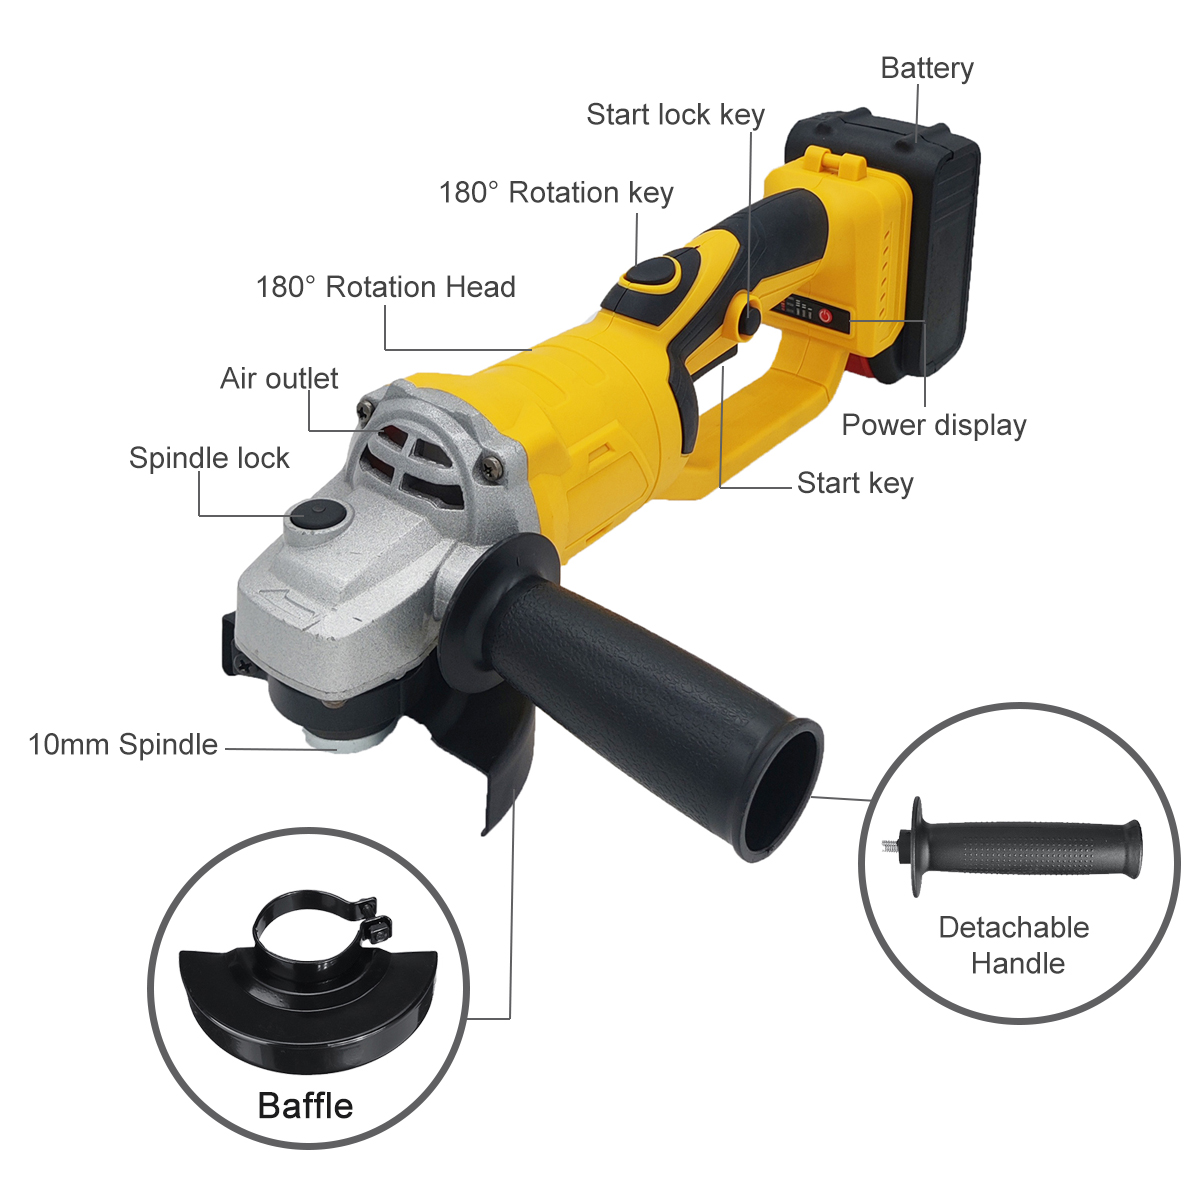 Rotary-Angle-Grinder-180deg-Rotation-Electric-Grinding-Tool-Fit-DAYI-Battery-1890602-4